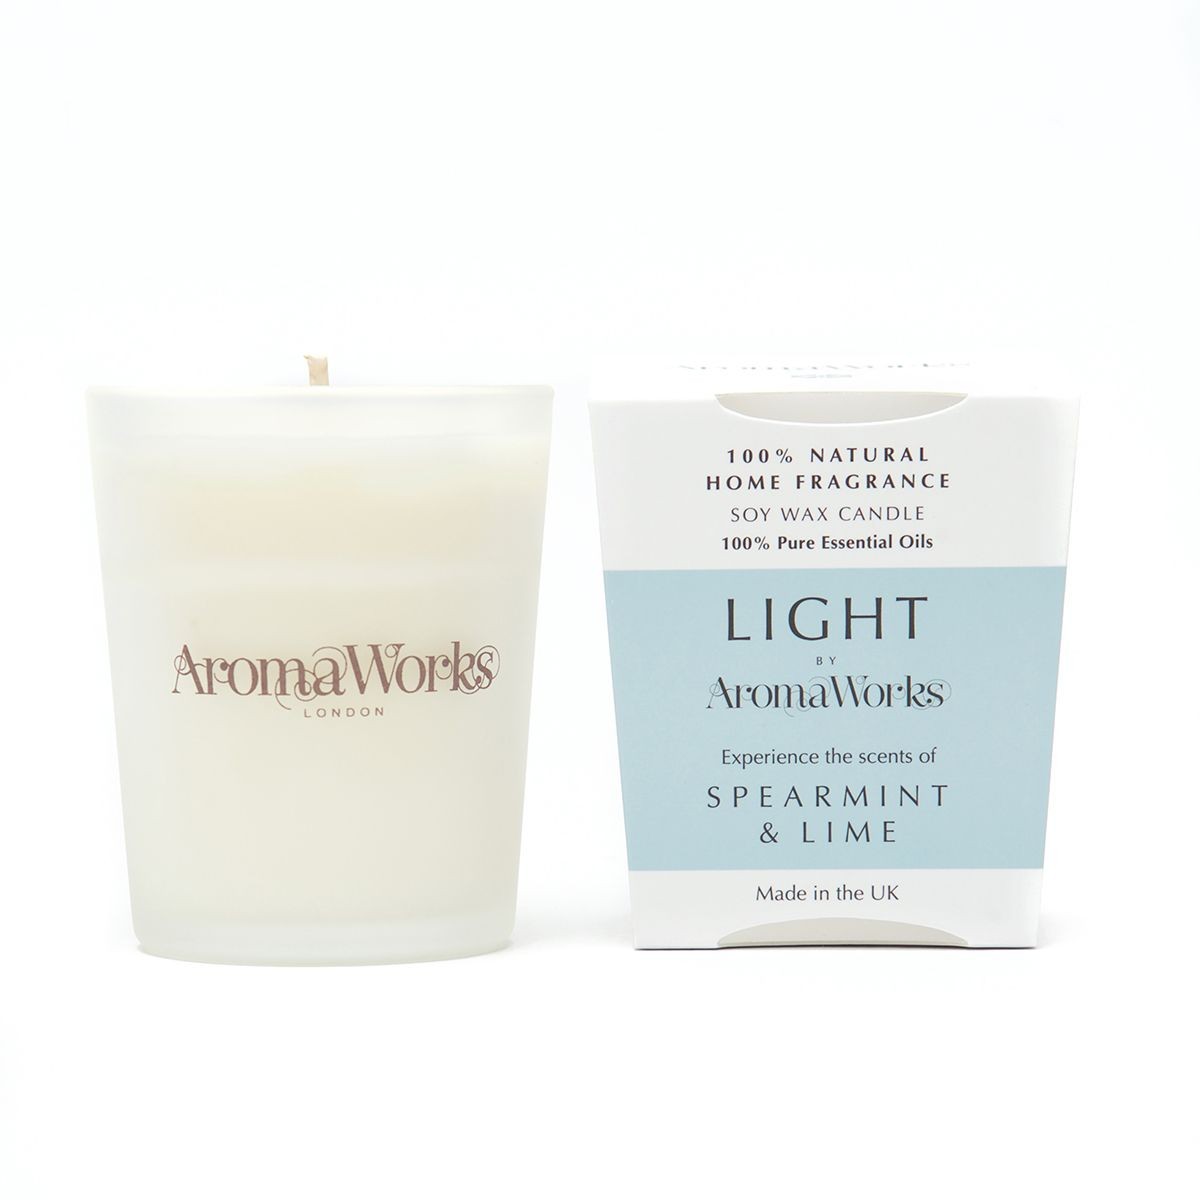 Aromaworks Light Spearmint & Lime Candle 10cl 